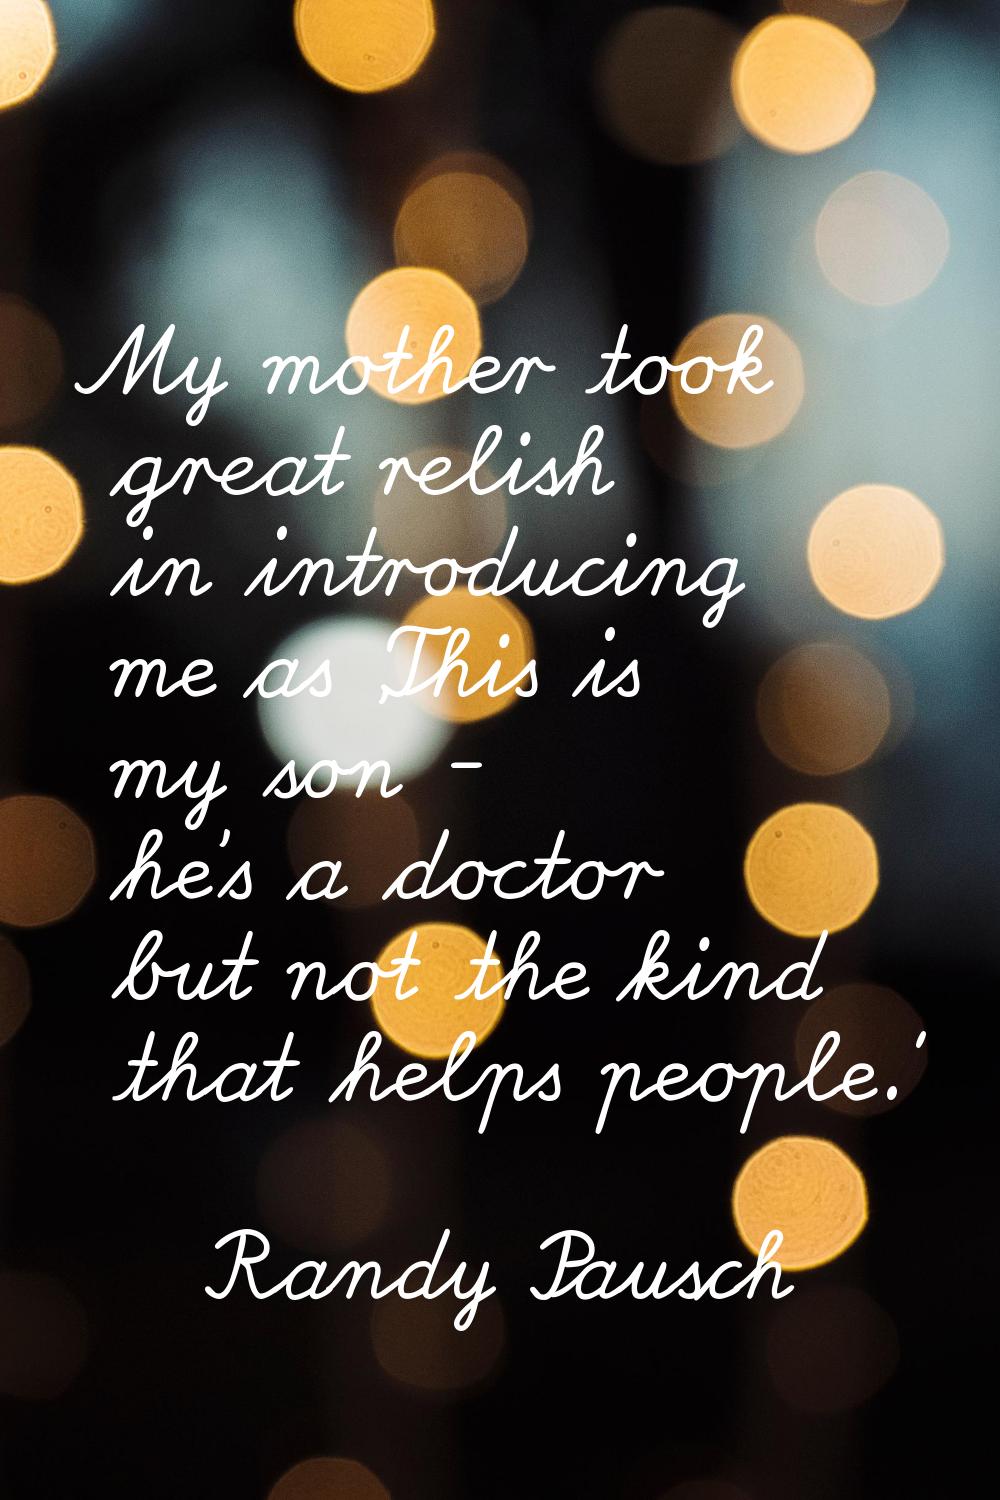 My mother took great relish in introducing me as 'This is my son - he's a doctor but not the kind t